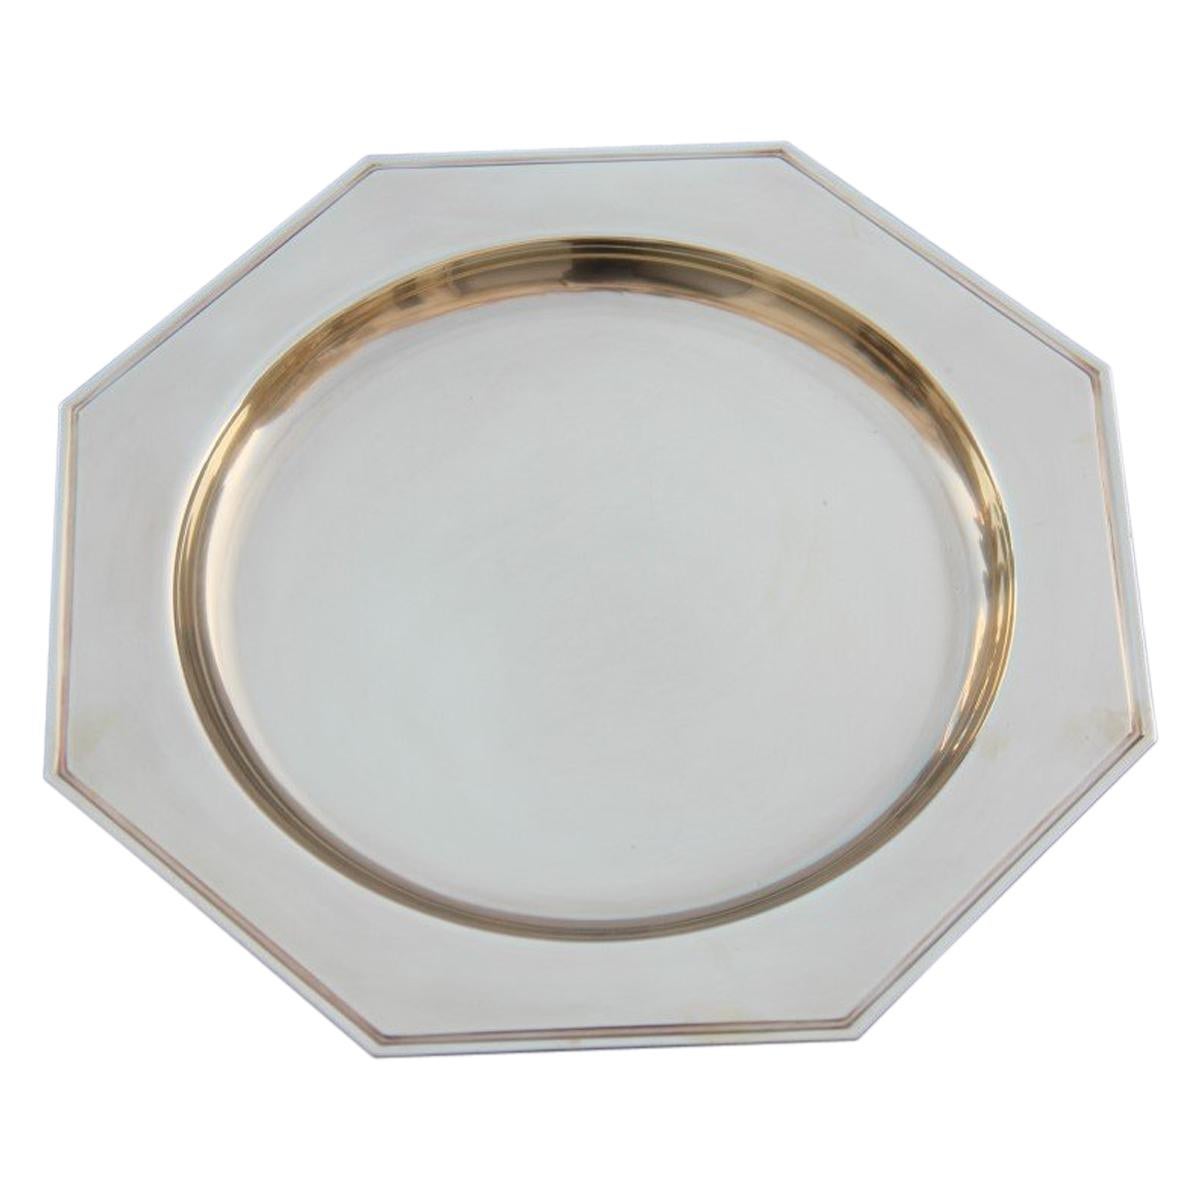 Hexagonal Plate in Solid Brass Gold Italian Design 1970 Tray For Sale